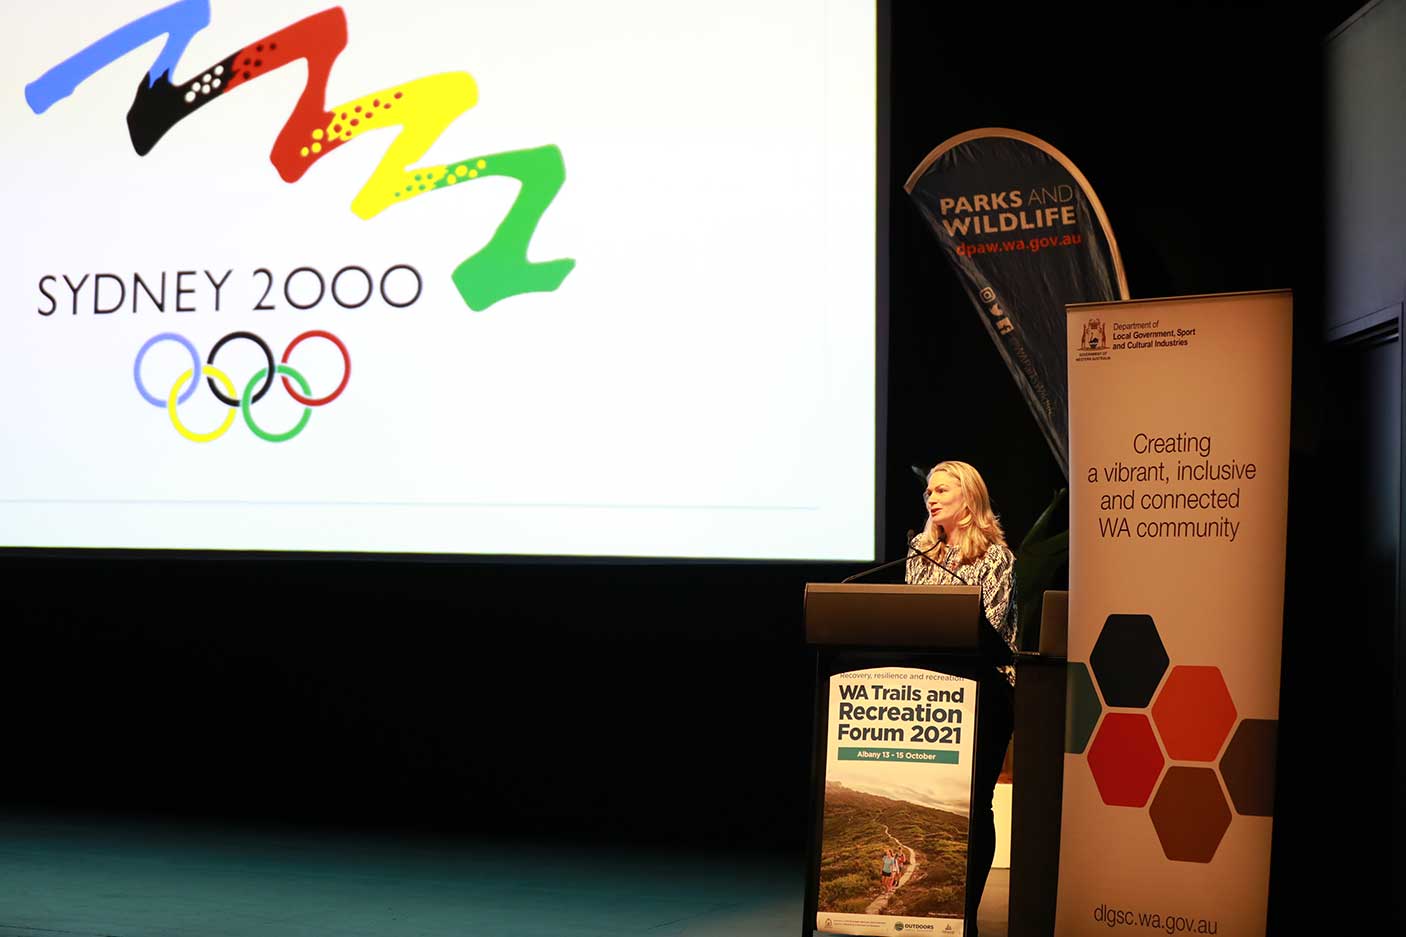 A person speaking at a lectern on stage. A Sydney 2000 Olympic logo is on screen.